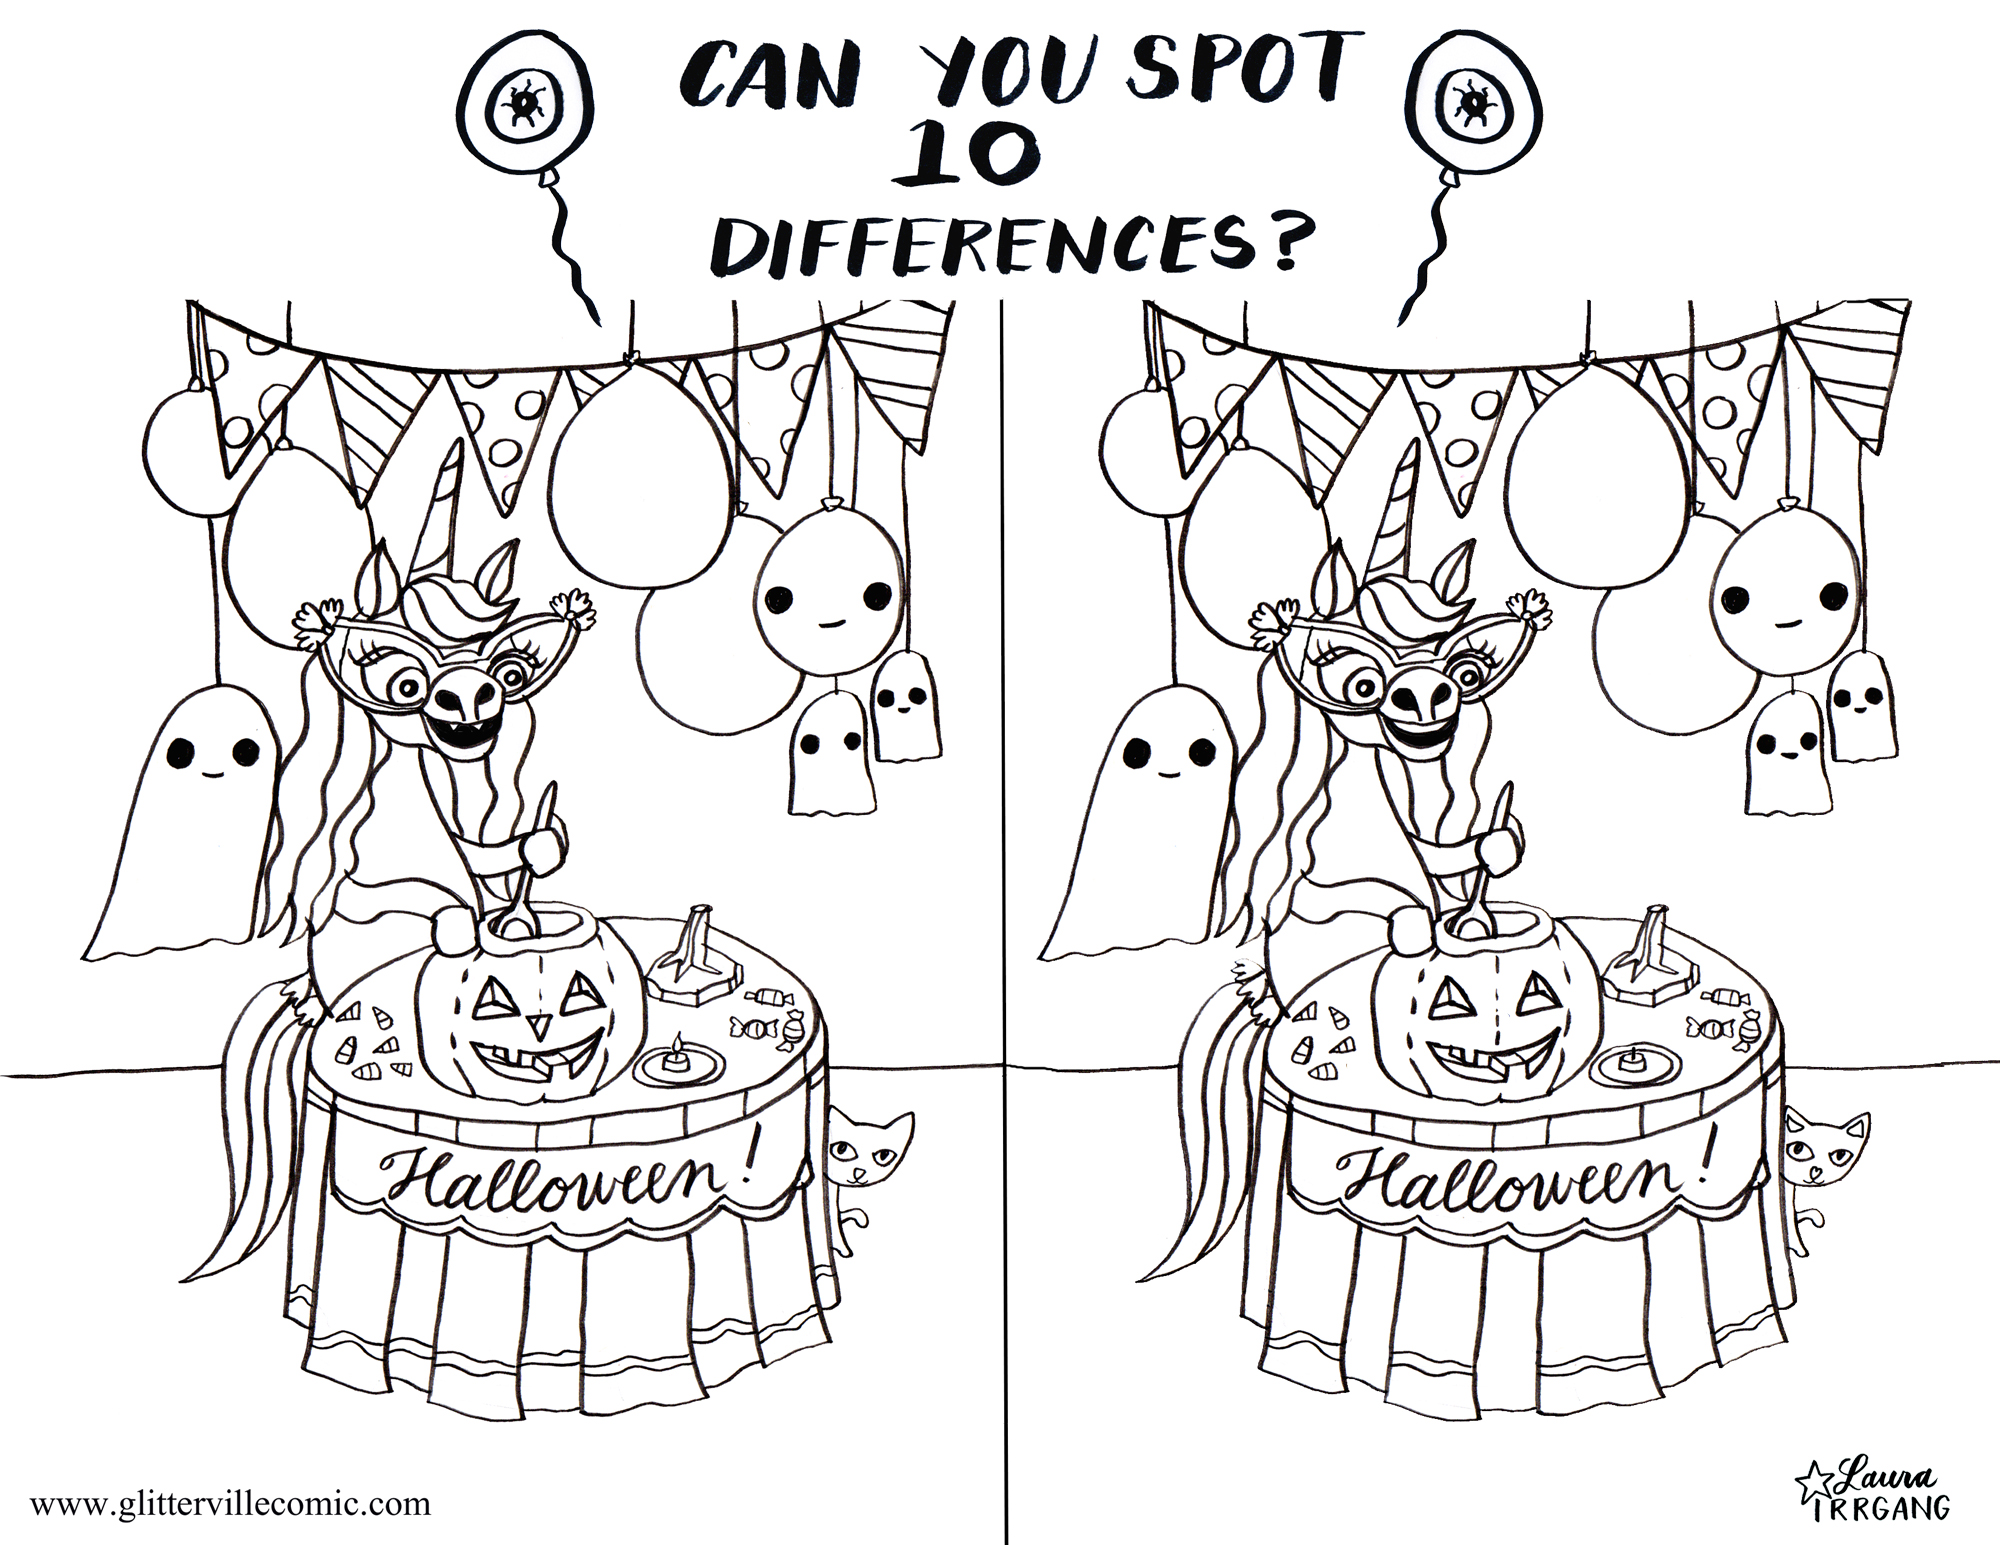 Can you spot the 10 differences? — Laura Irrgang